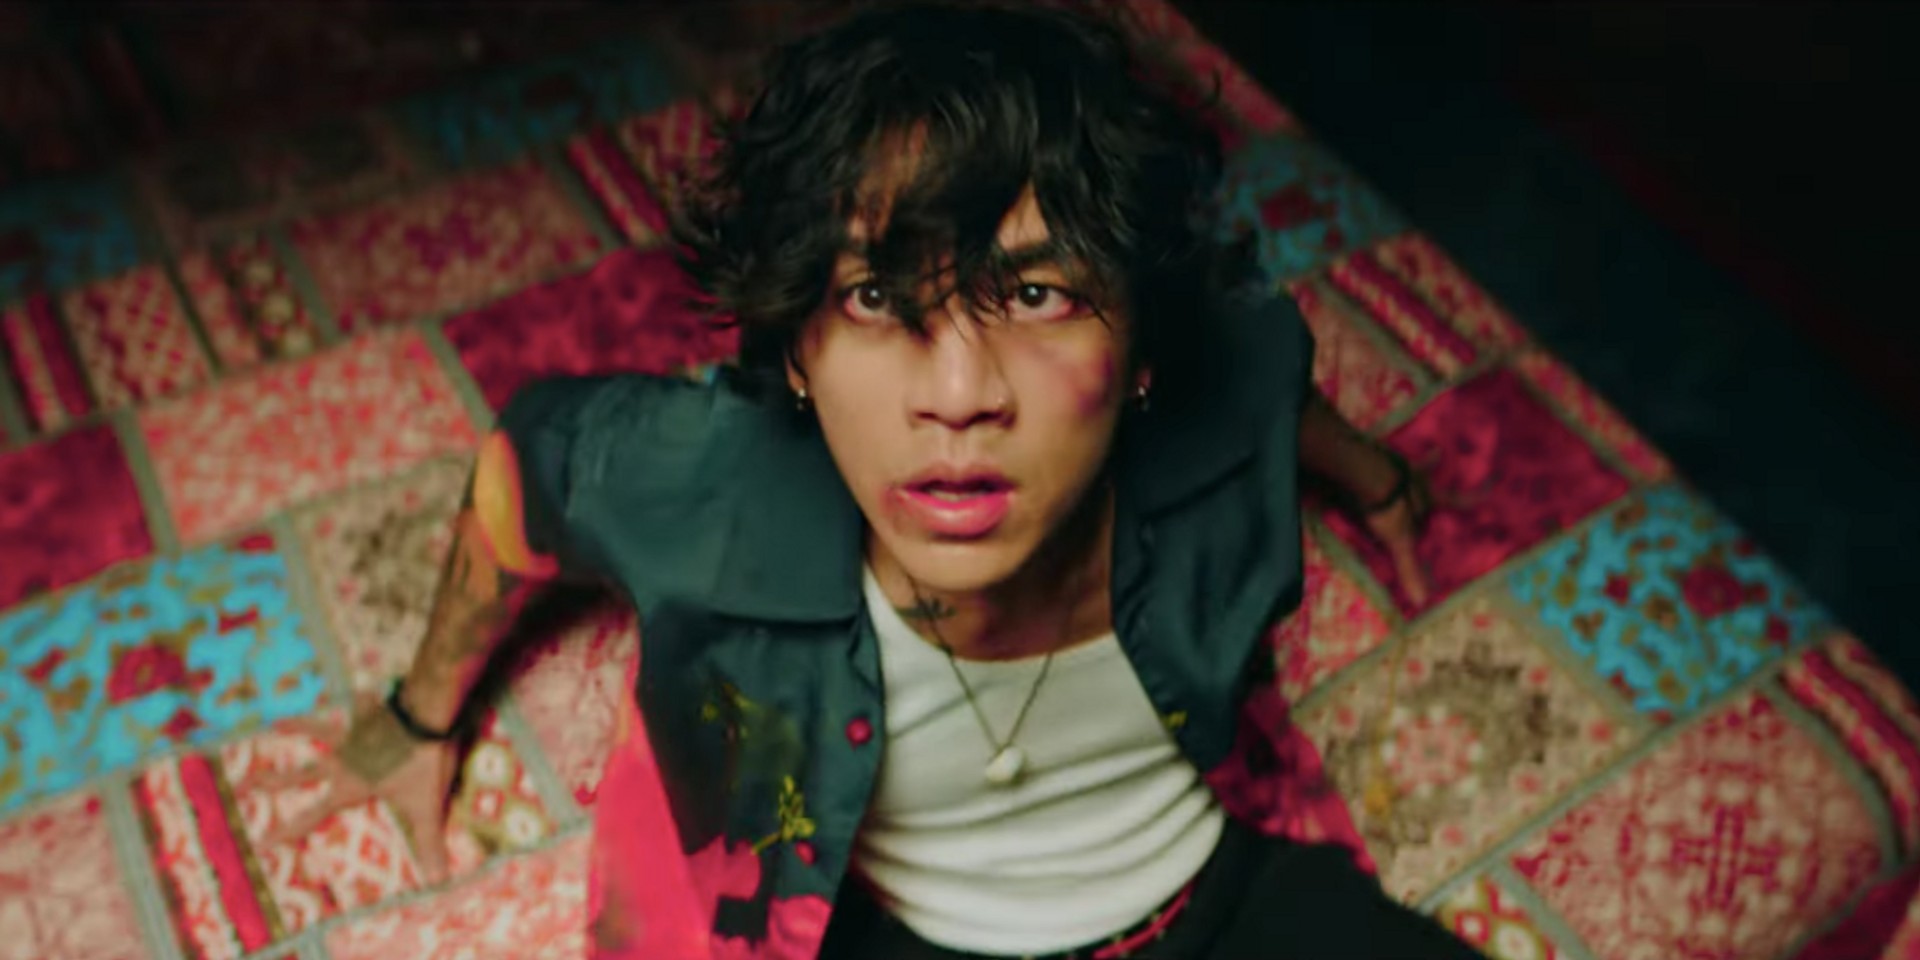 DPR IAN drops surprise track 'BALLROOM EXTRAVAGANZA' from upcoming album — watch